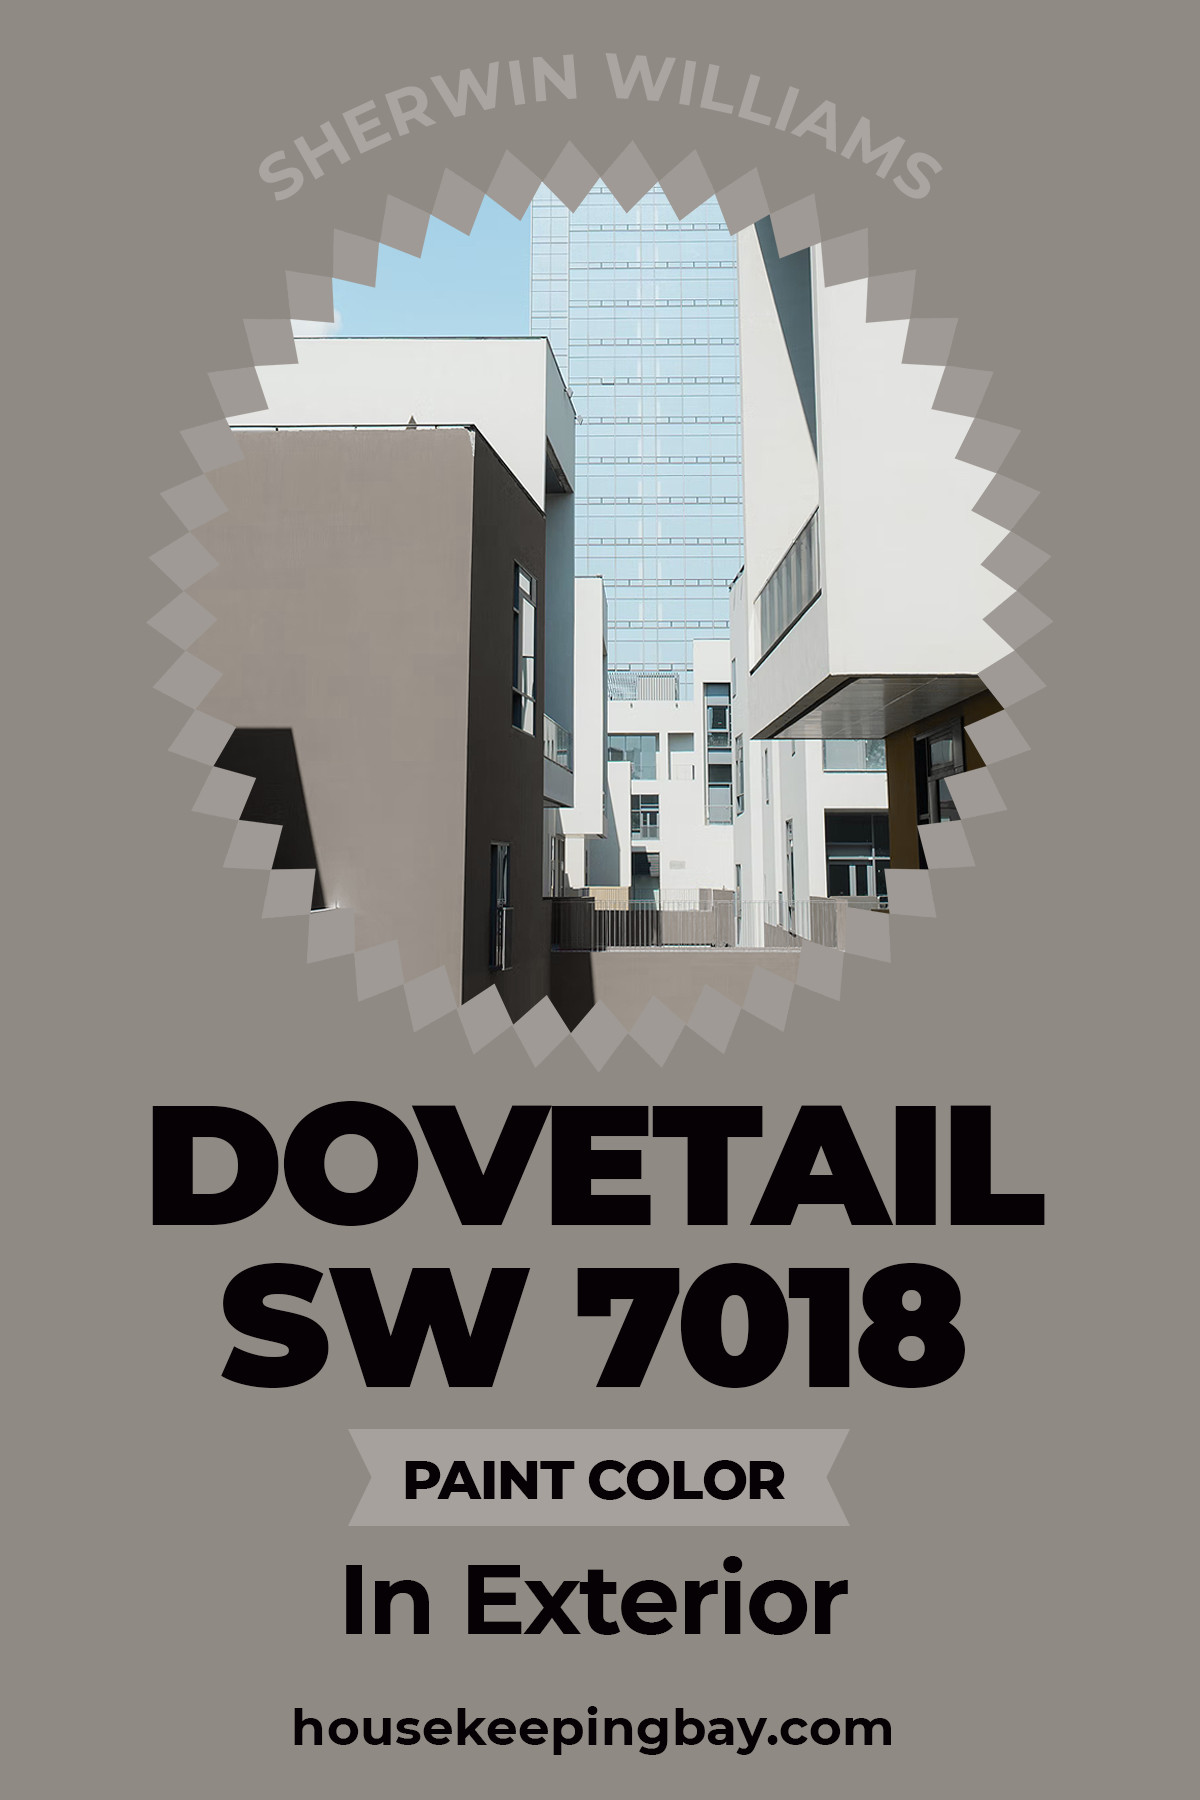 Sherwin Williams Dovetail Paint Color in exterior